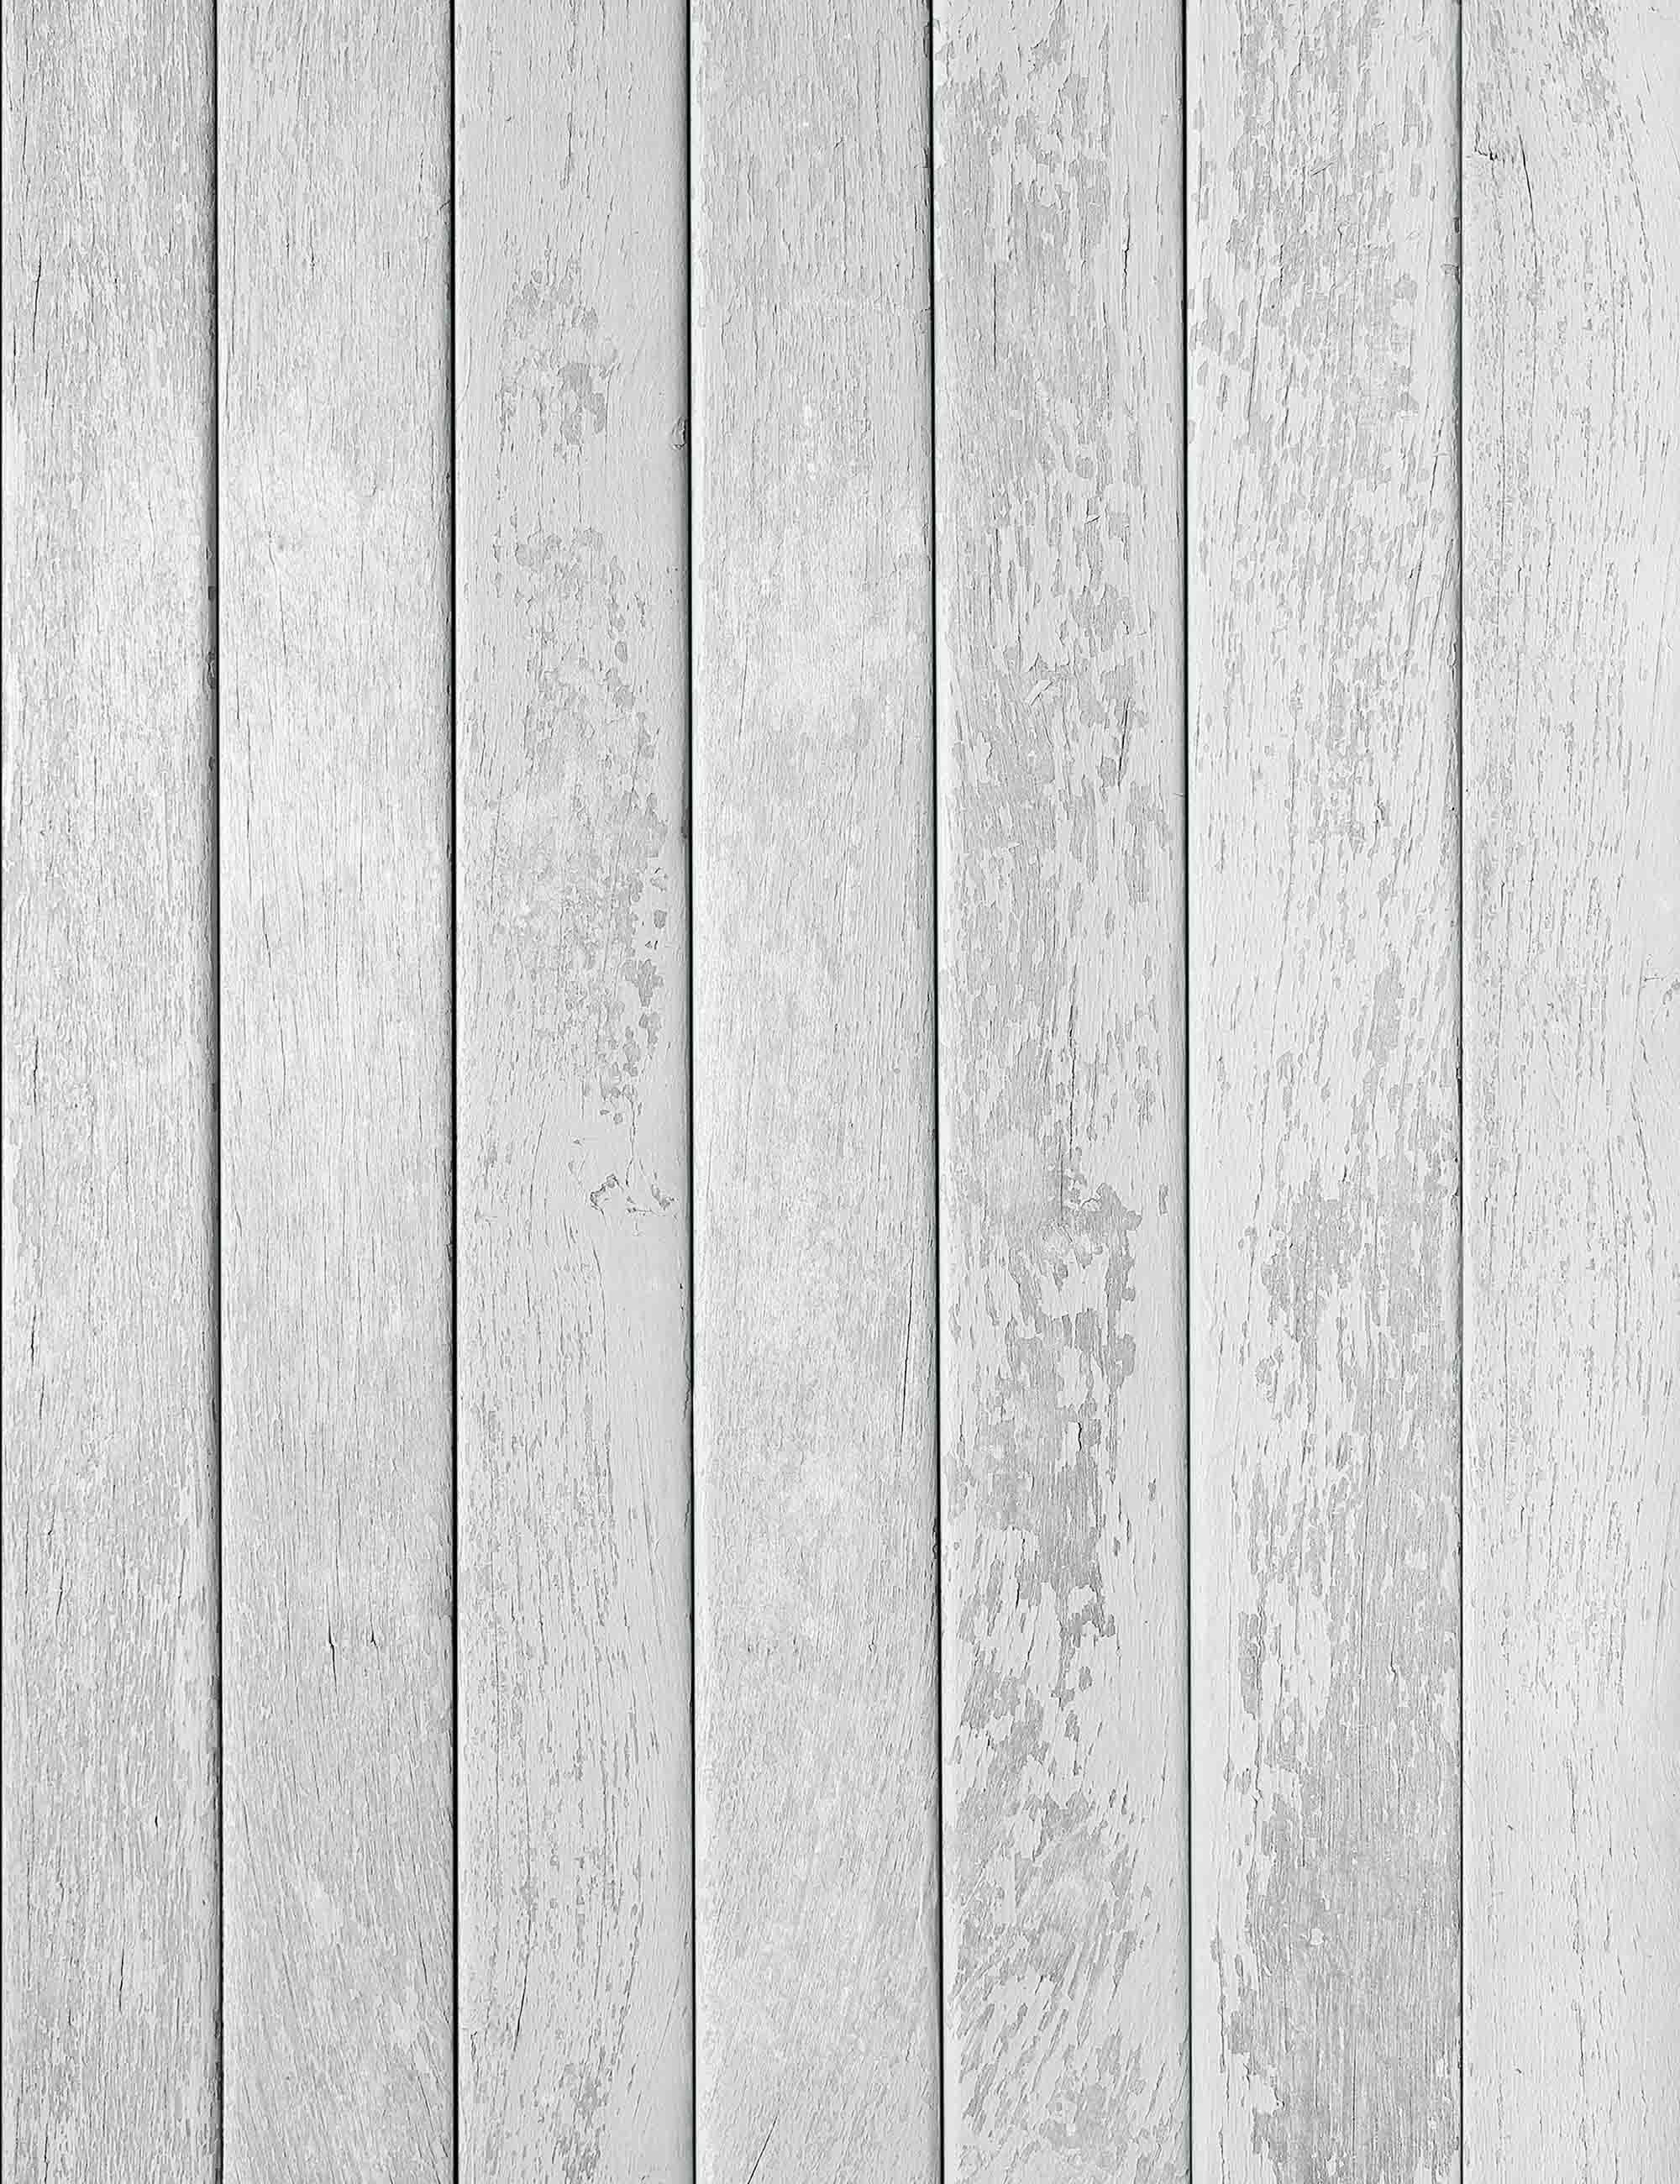 Old White Printed Wood Floor Texture Backdrop For Photography Shopbackdrop